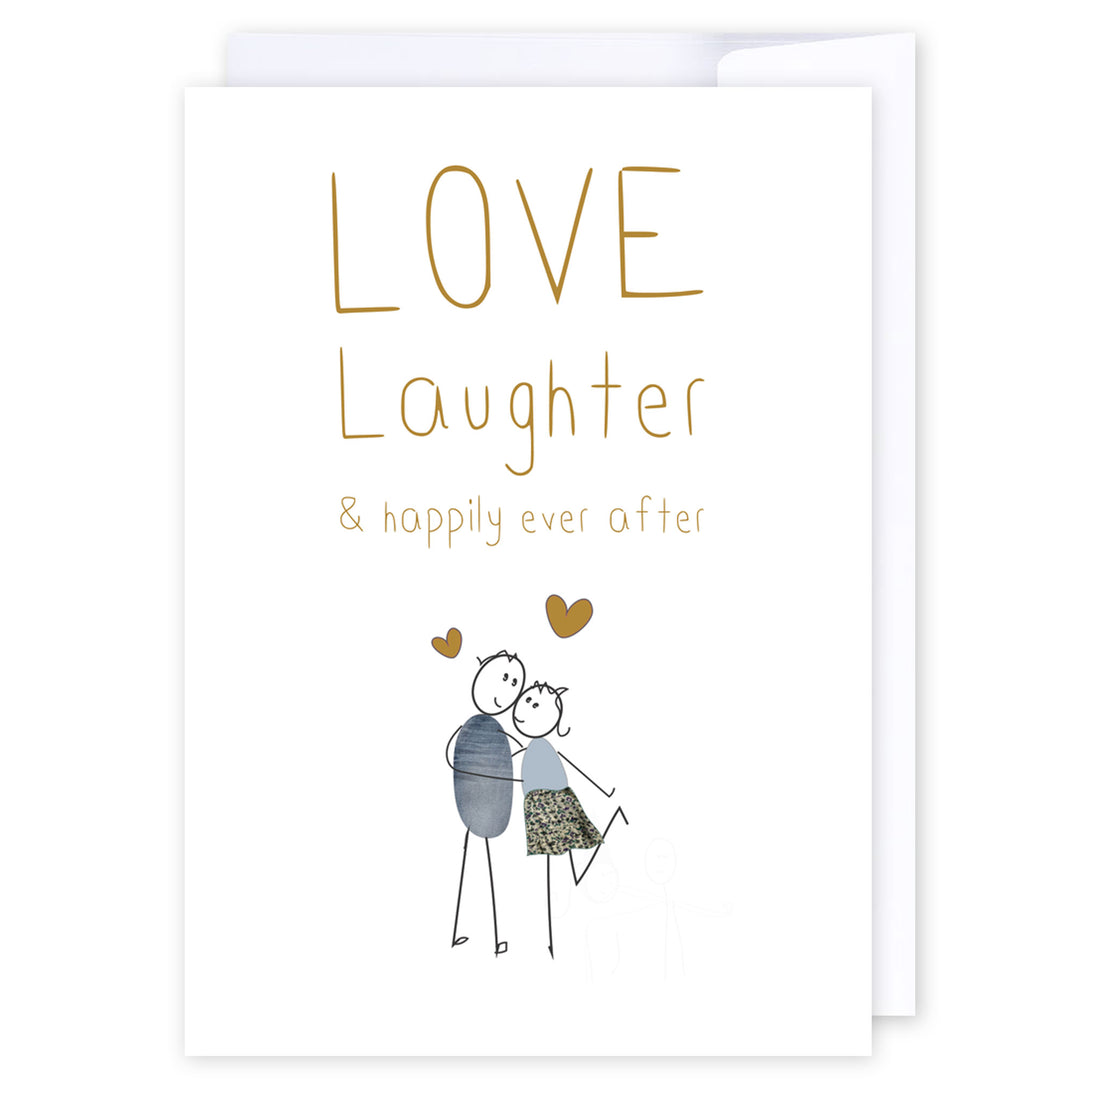 Love &amp; laughter